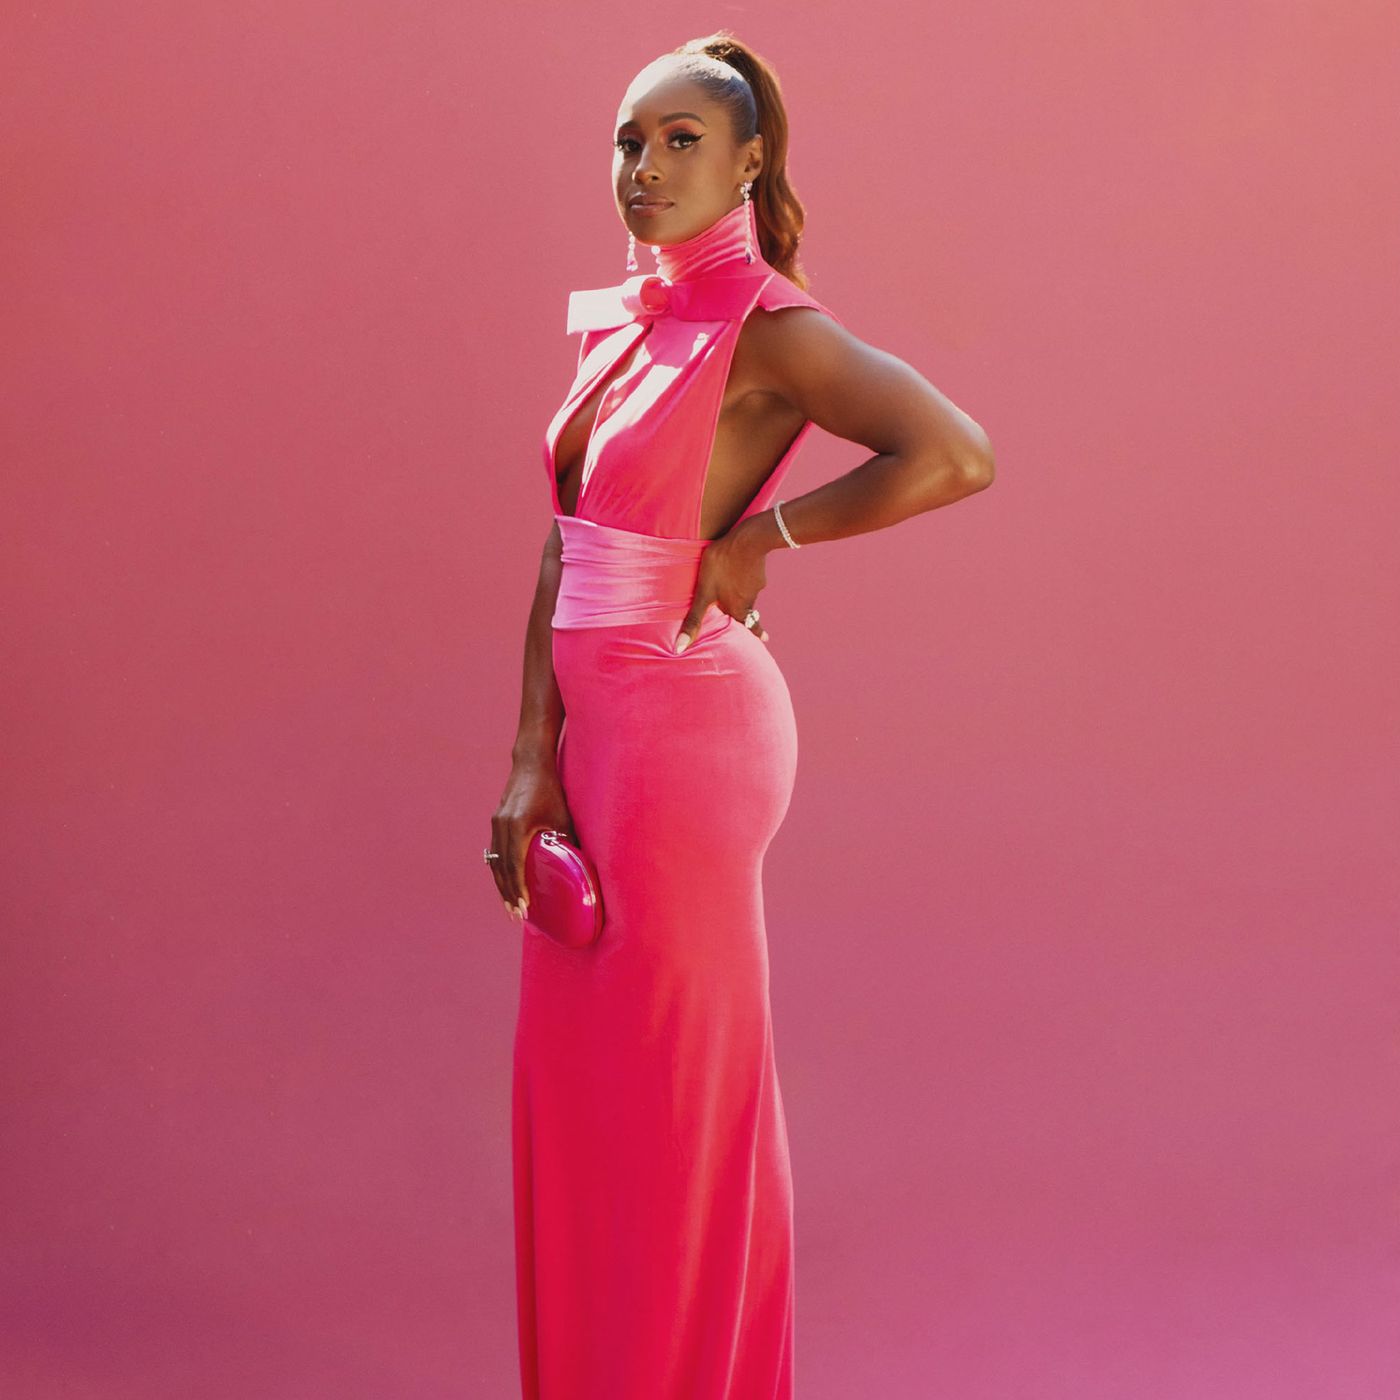 Issa Rae Initially Didn't Think Her Body Was in 'Barbie Shape' When She Was  Cast